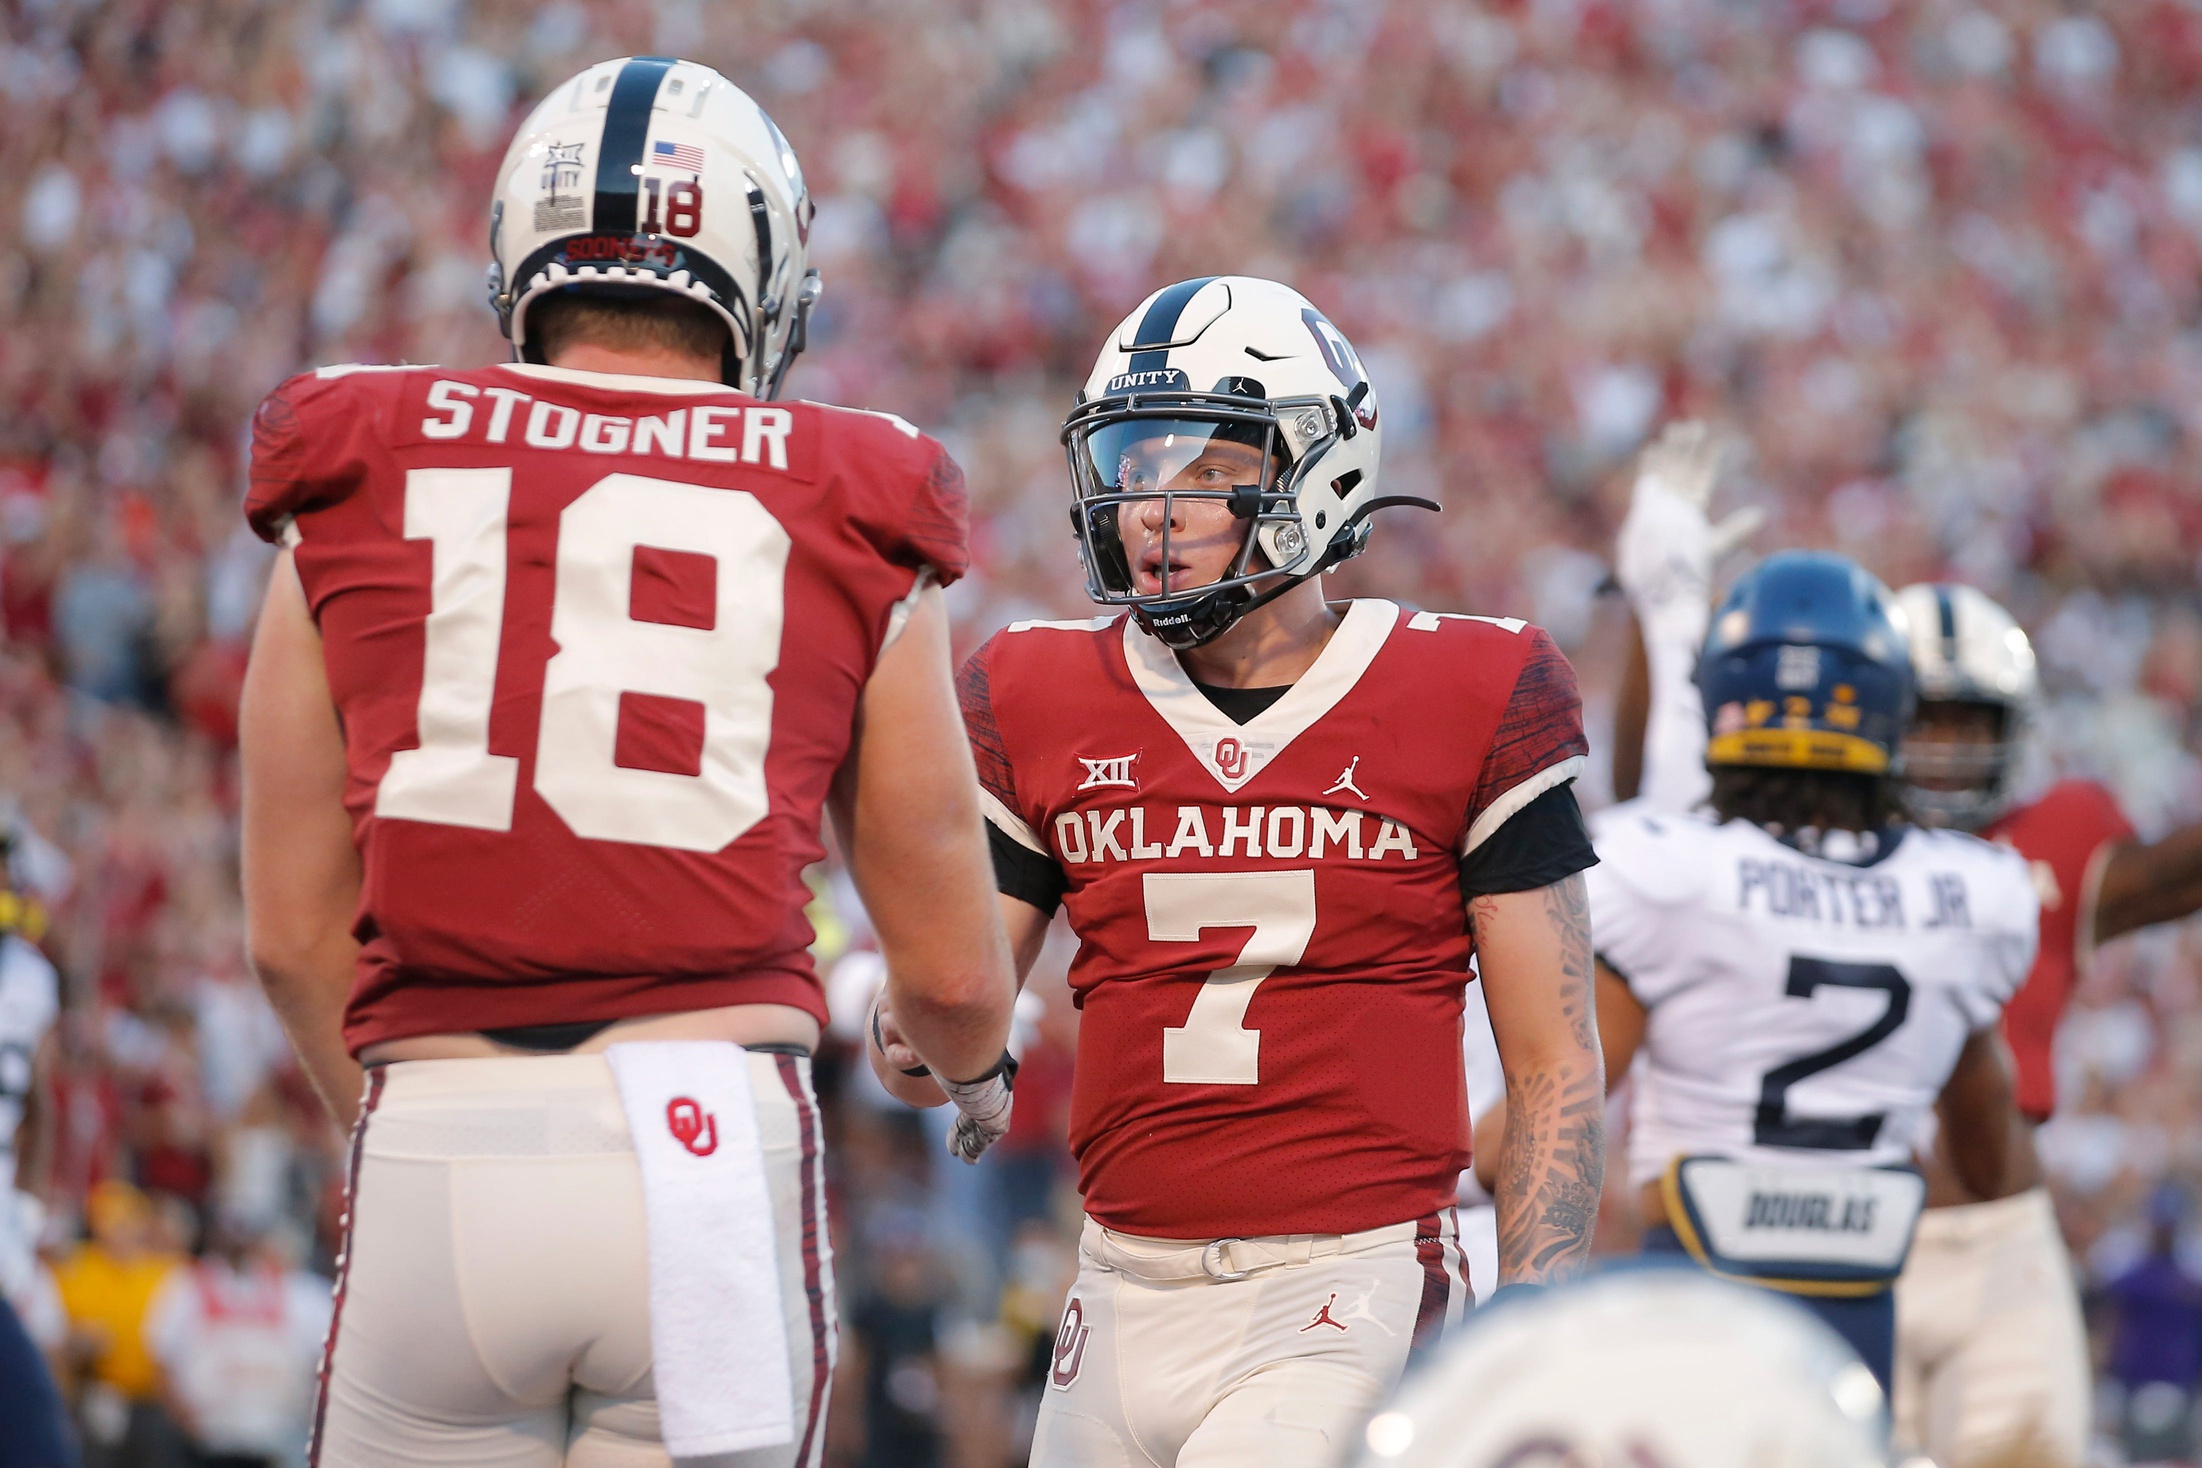 NFL Draft Profile: Spencer Rattler, Quarterback, South Carolina Gamecocks -  Visit NFL Draft on Sports Illustrated, the latest news coverage, with  rankings for NFL Draft prospects, College Football, Dynasty and Devy Fantasy